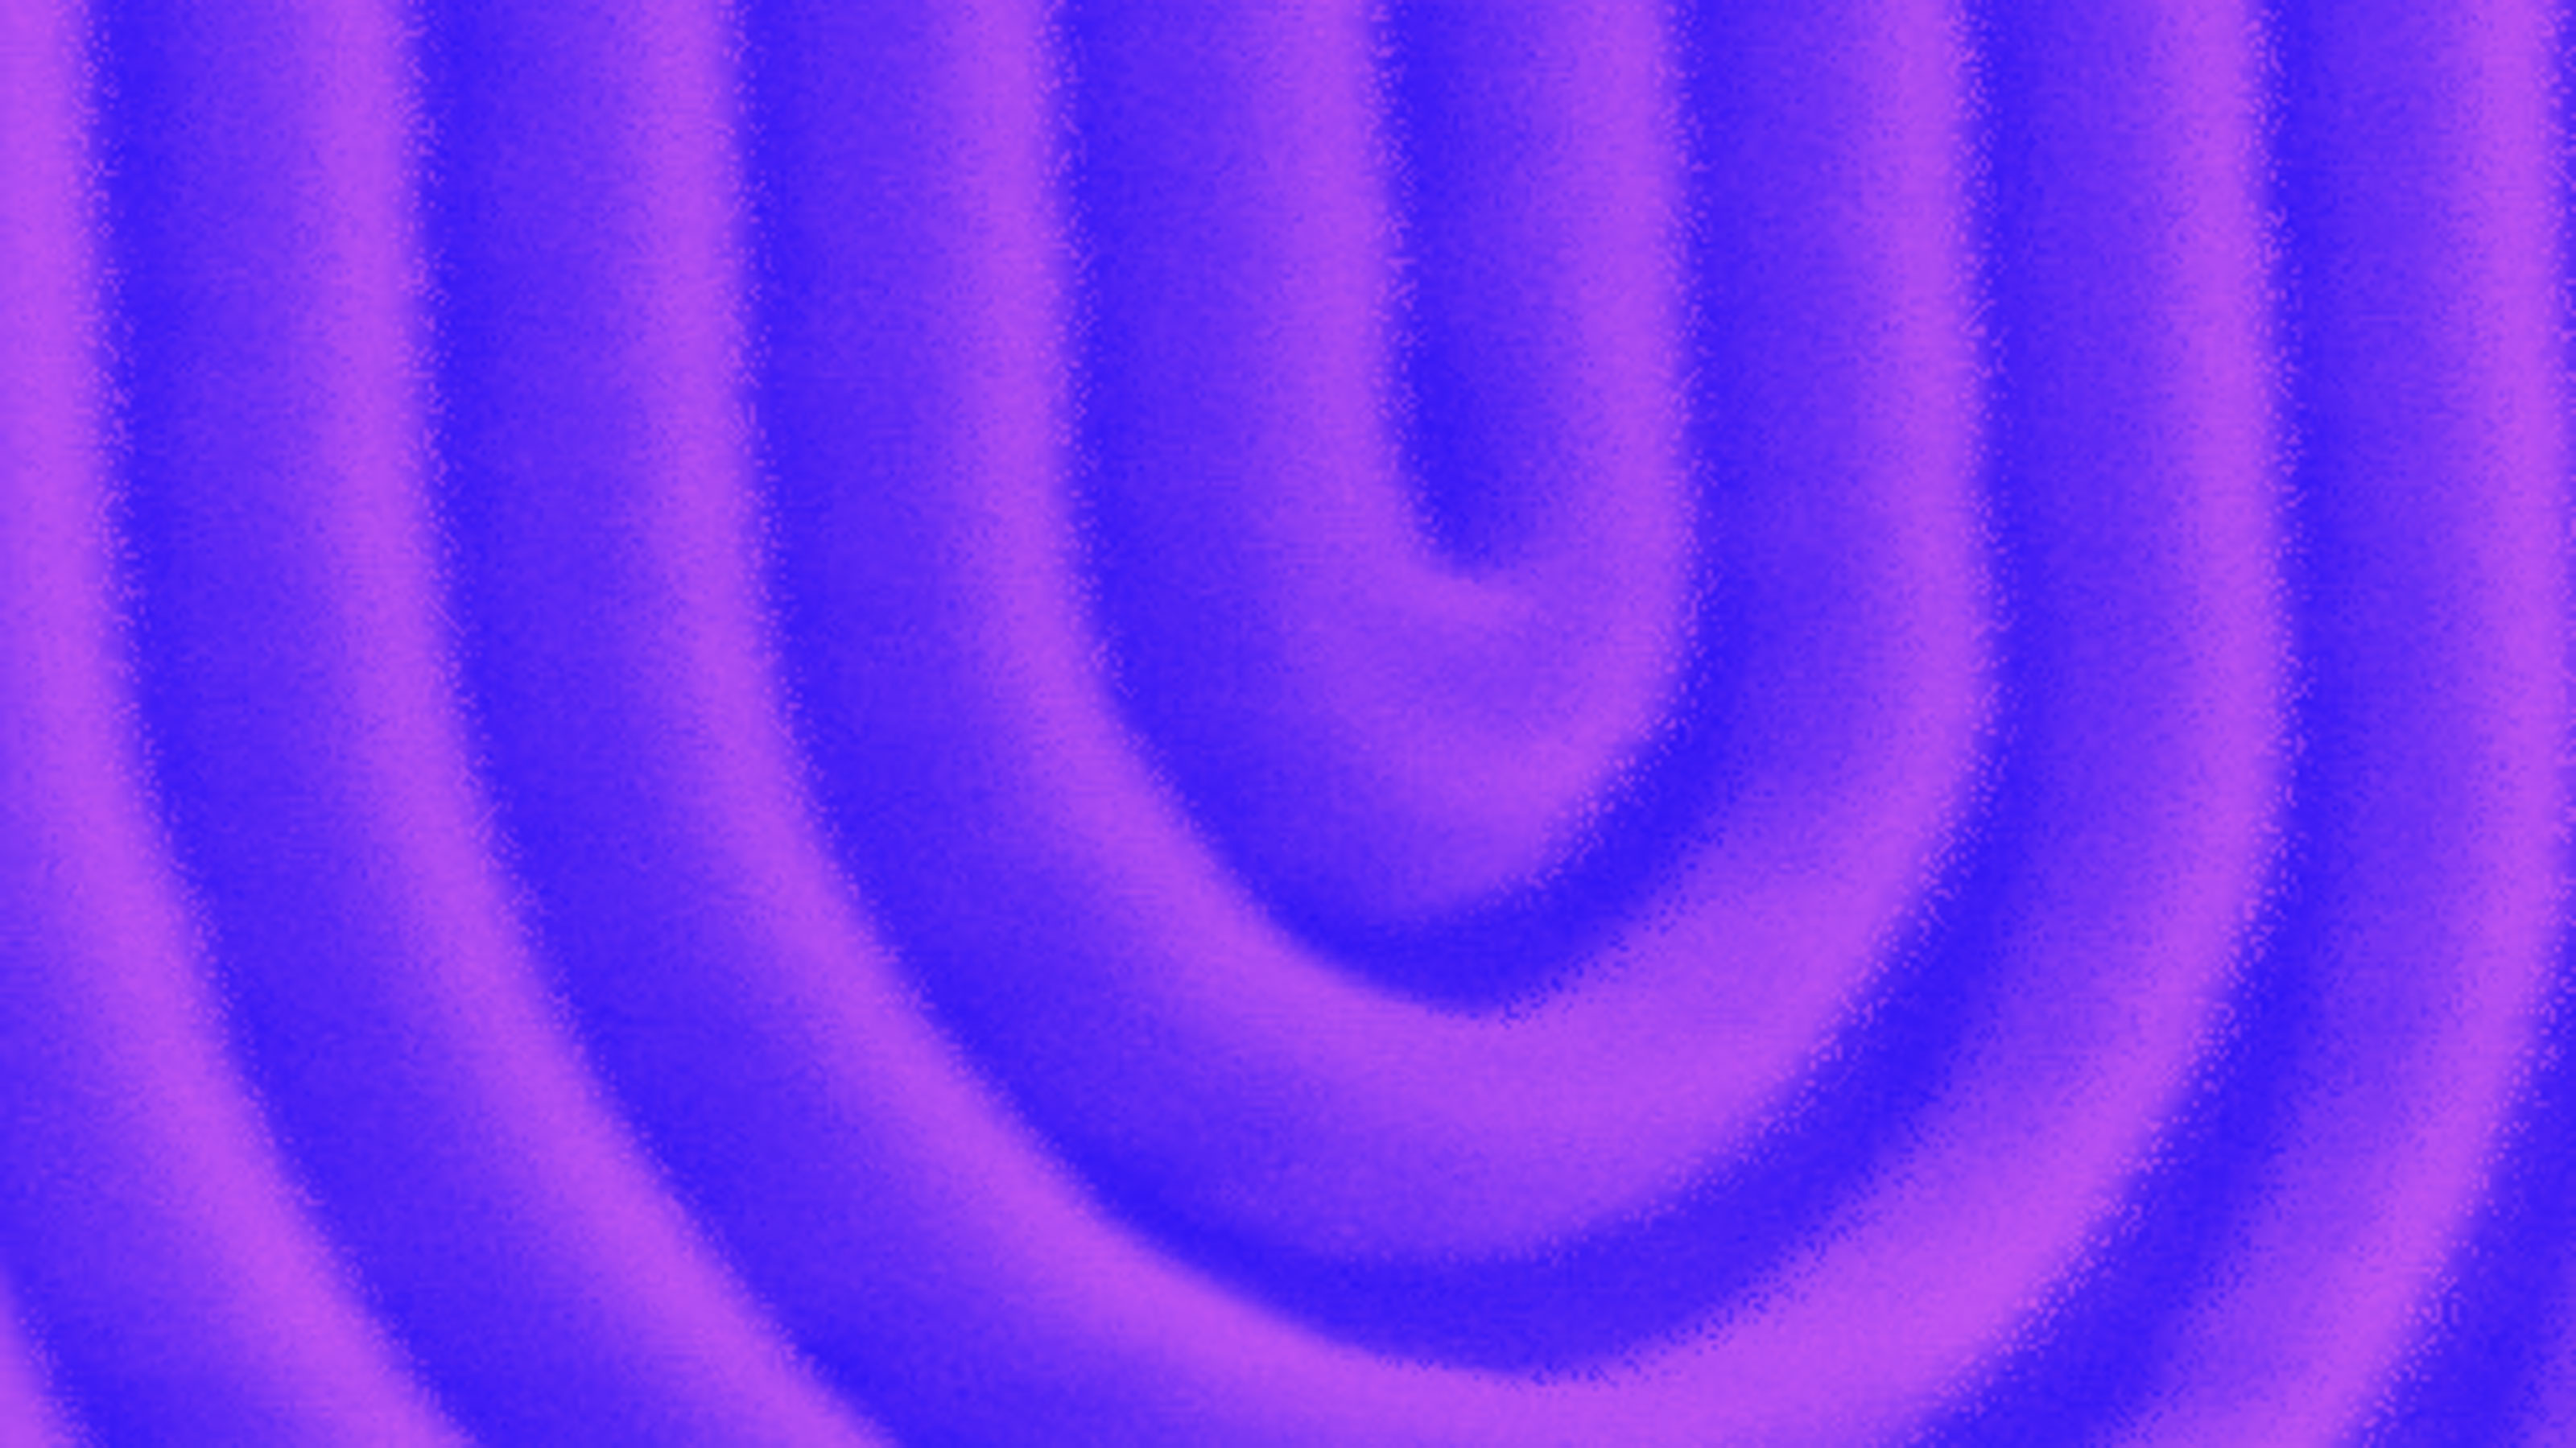 SEM image (viewing angle tilted 30°) of the ‘U’ shape focused metalens